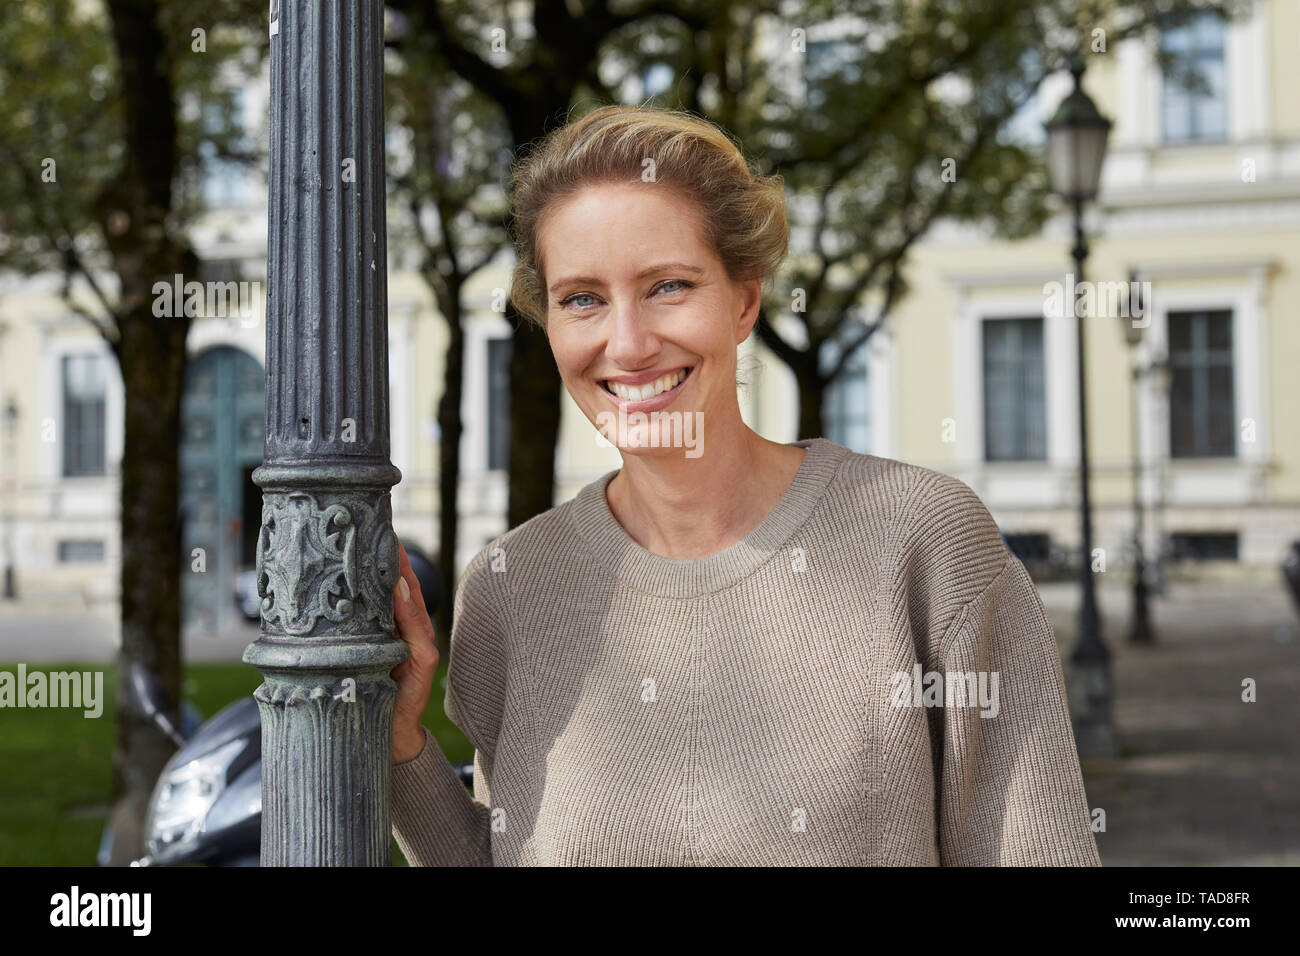 Portrait of smiling woman leaning against lamp post in the city Stock Photo